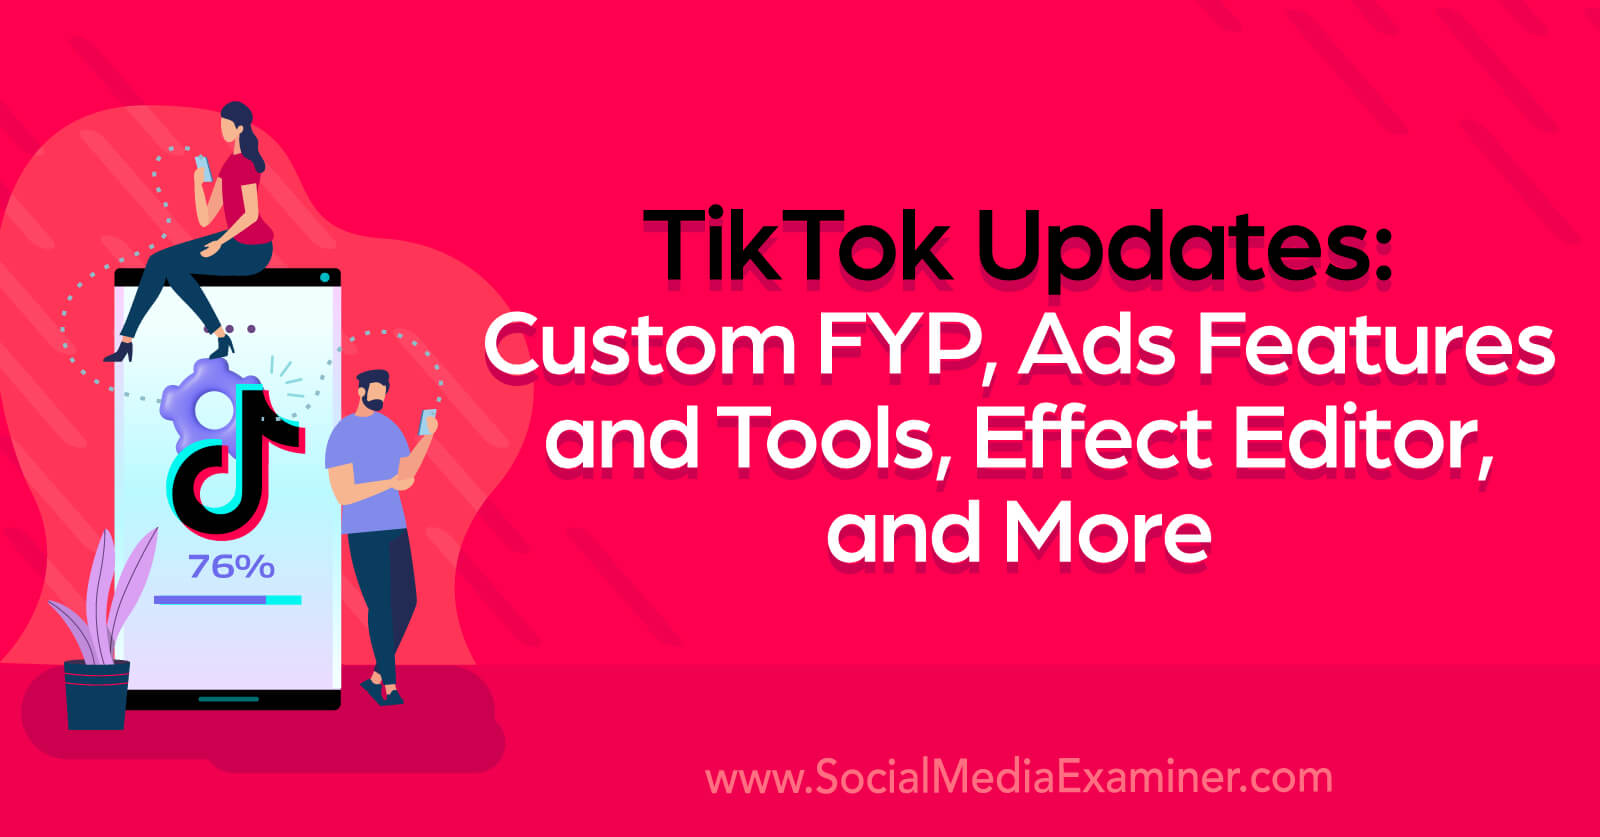 TikTok Updates: Custom FYP, Ads Features and Tools, Effect Editor, and More by Social Media Examiner